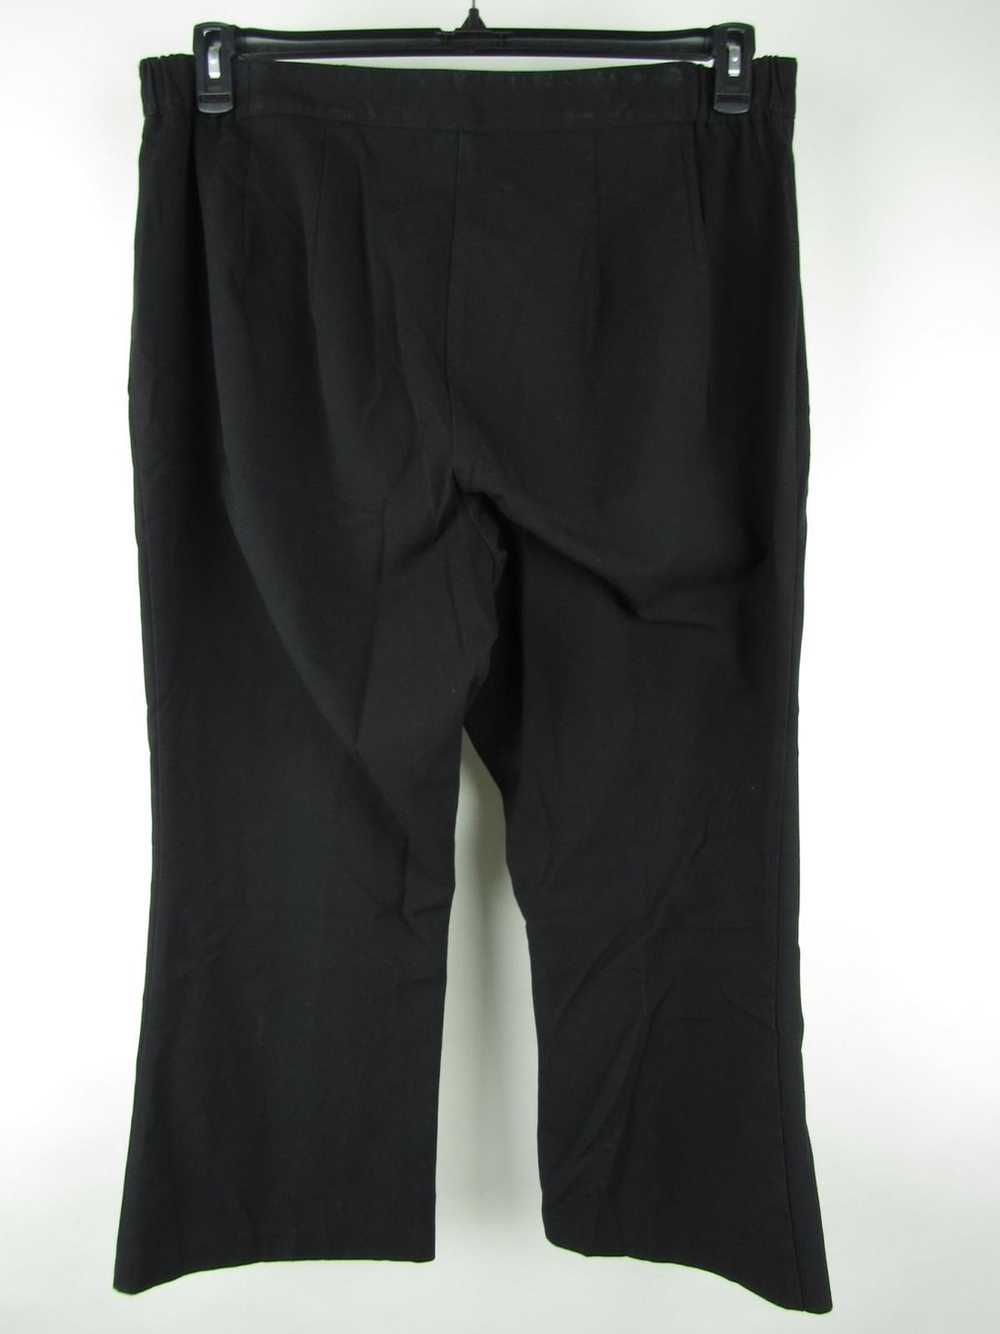 Maggie Barnes For Catherines Dress Pants - image 2